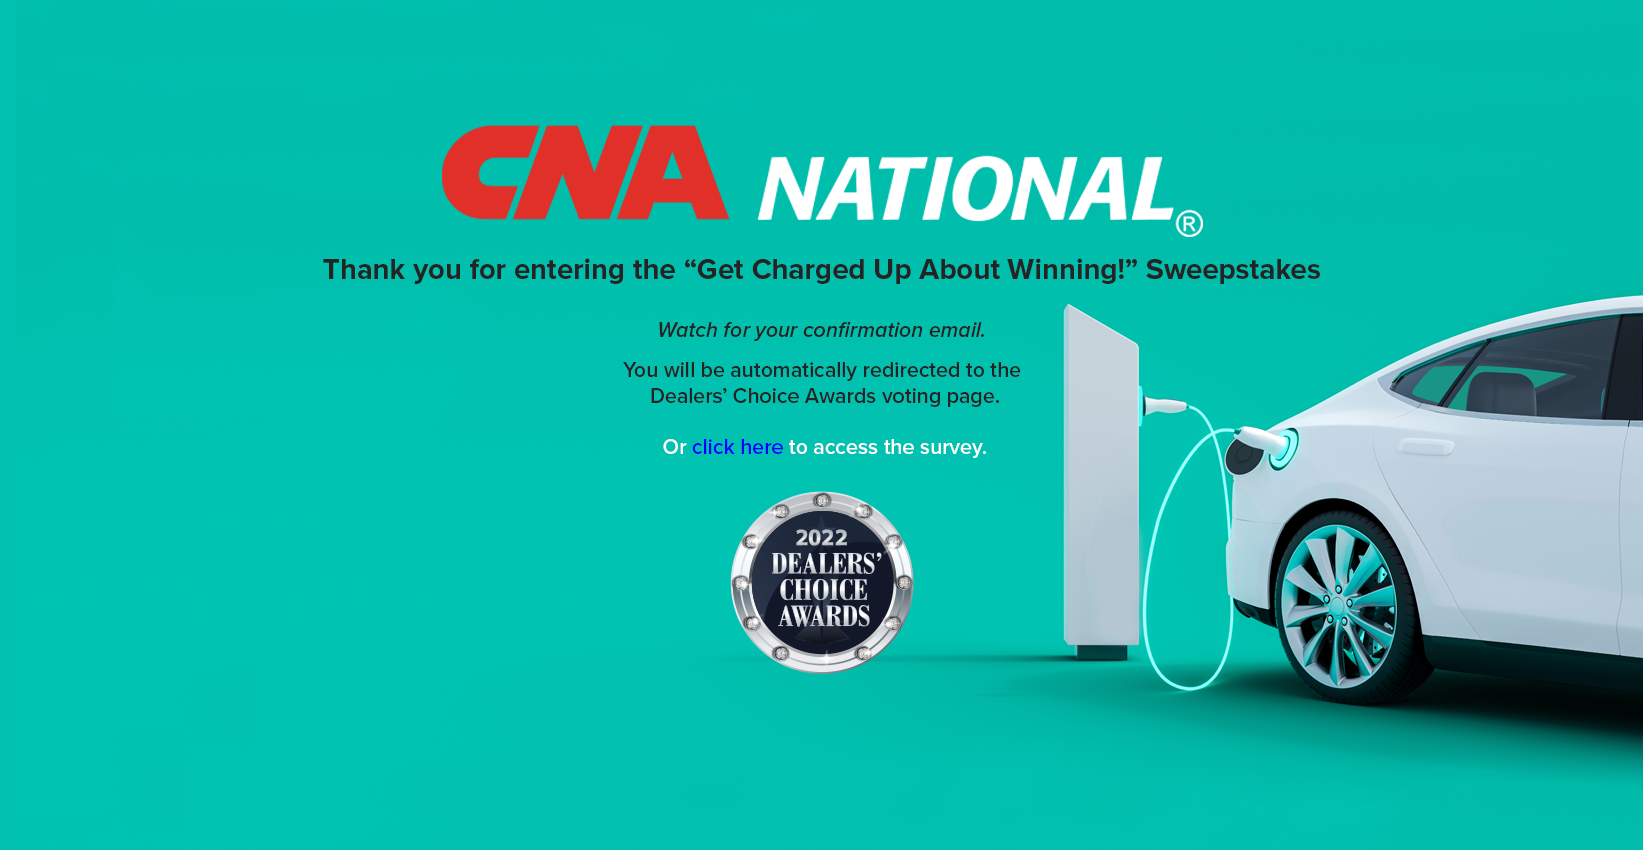 Thank you for entering the "Get Charged Up About Winning!" Sweepstakes